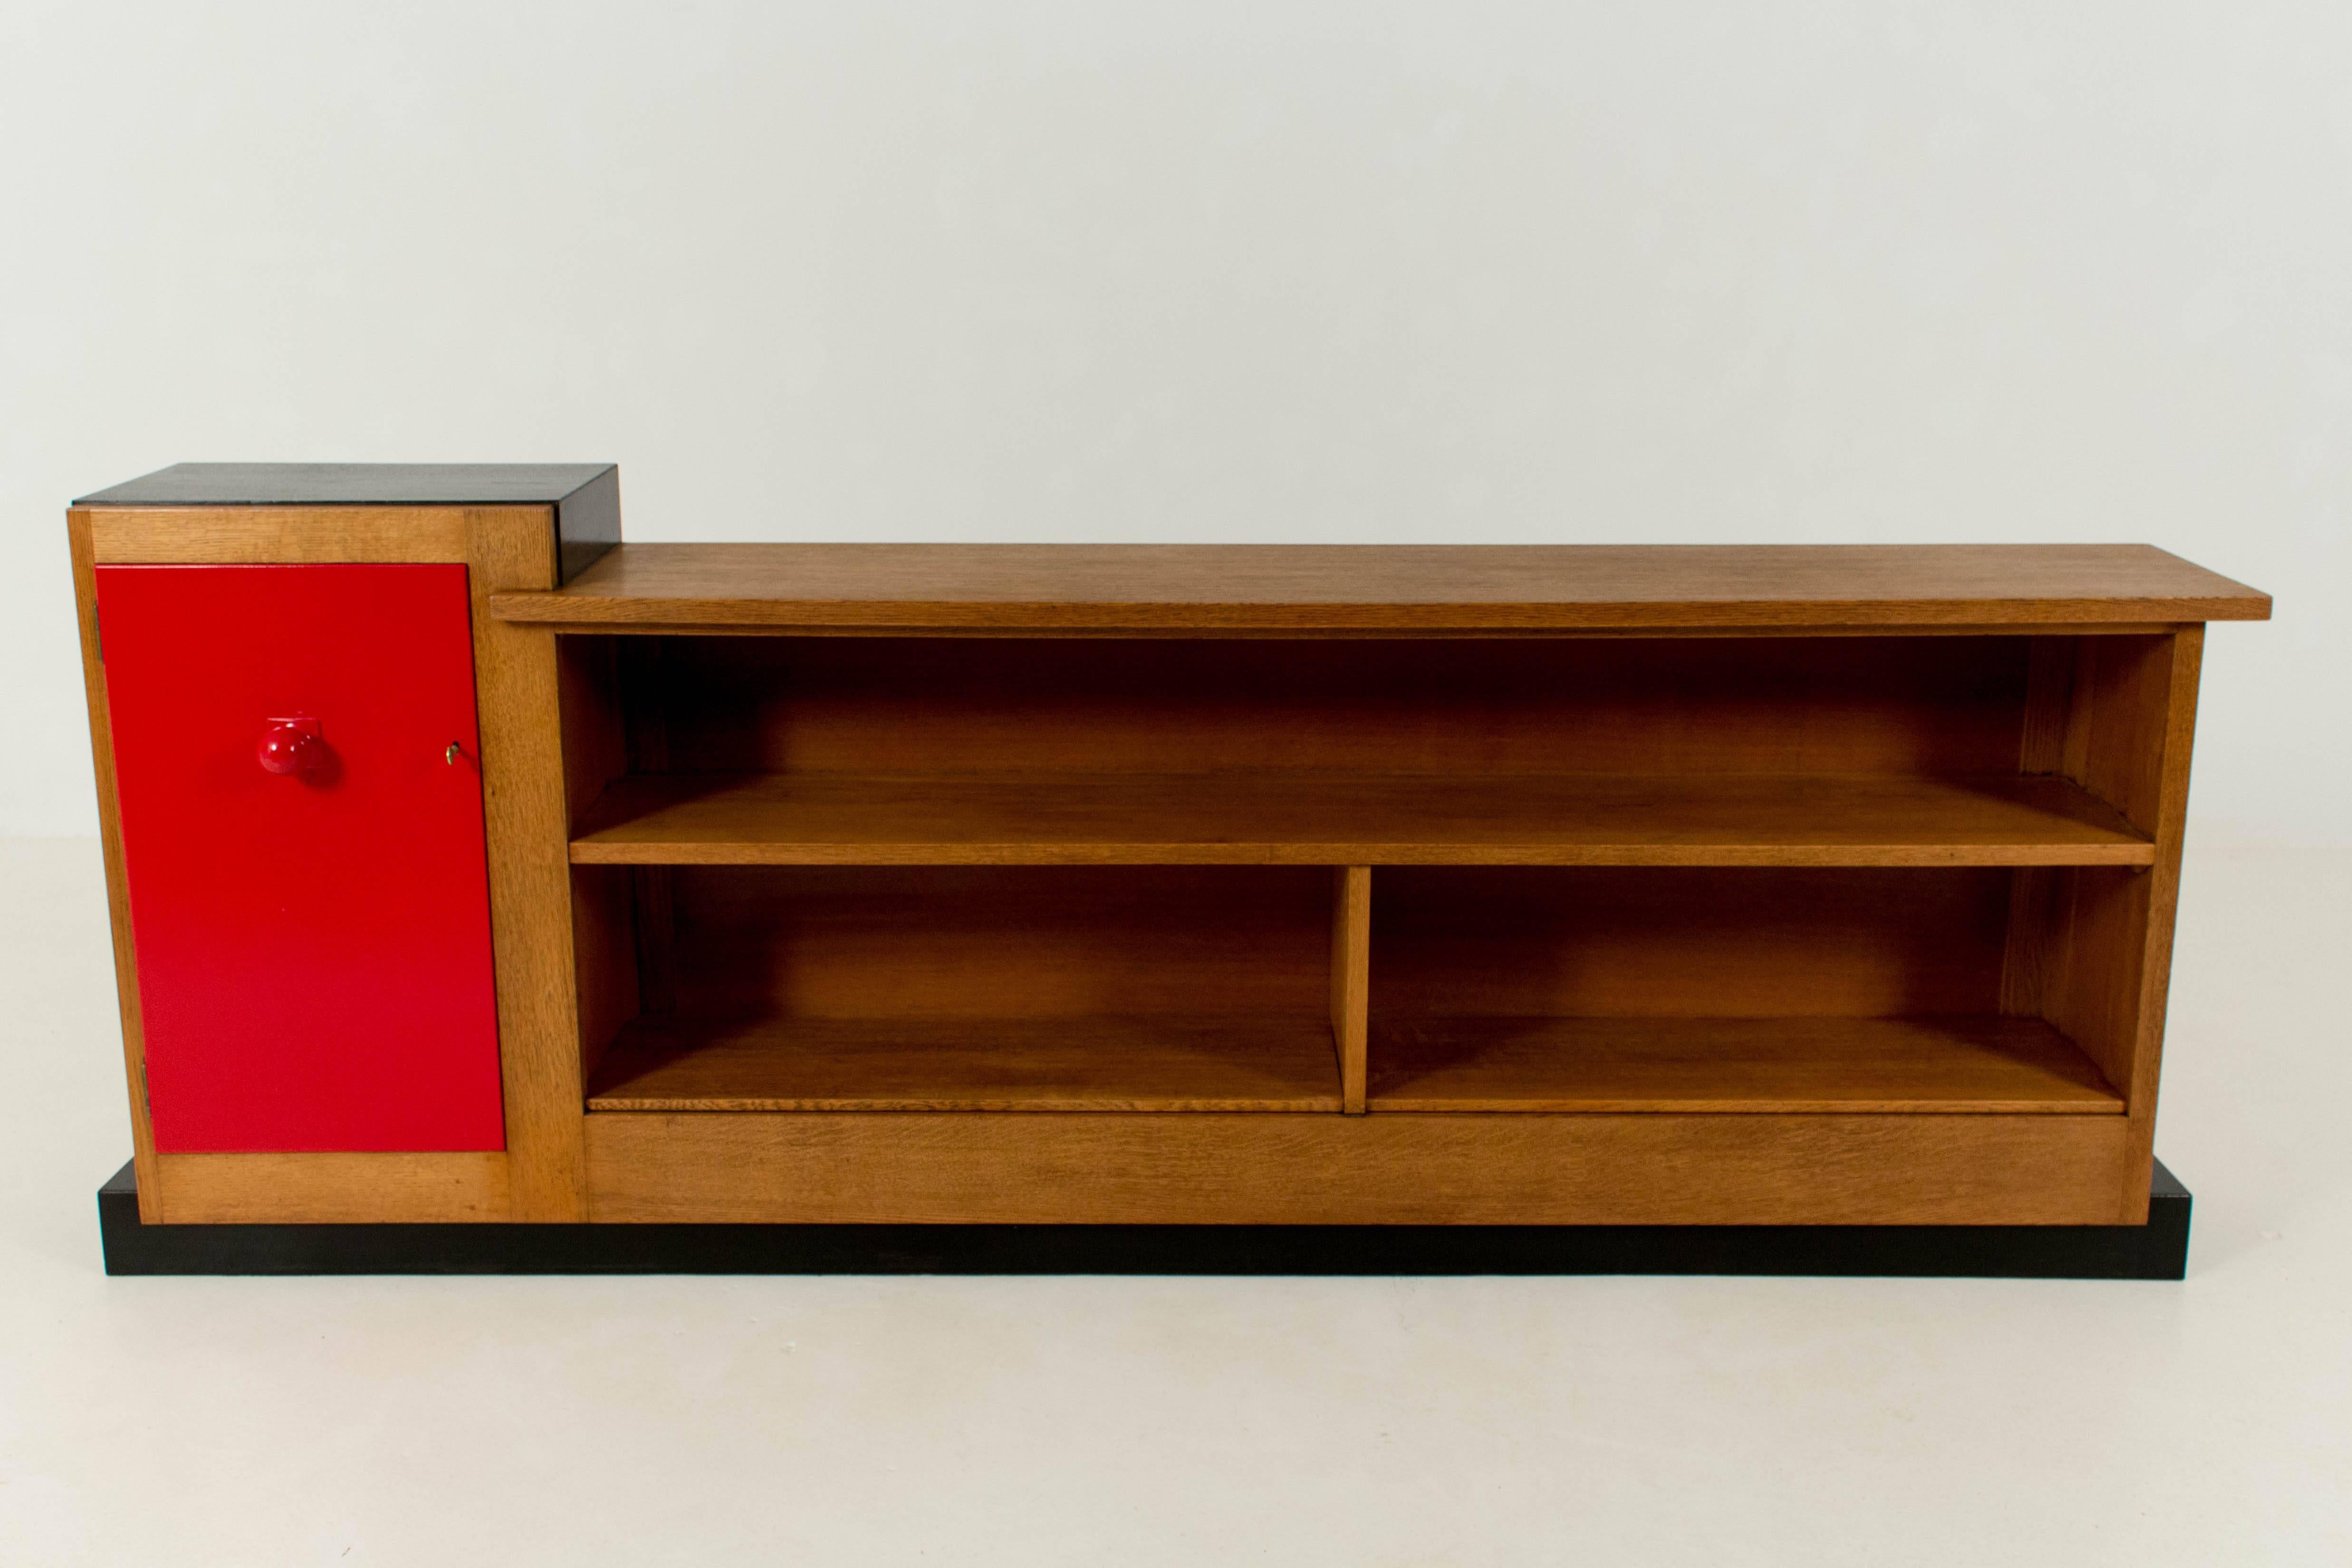 Important and rare Art Deco Haagse school sideboard by Henk Wouda for Pander 1927.
Stunning design and part of a set with matching desk and armchair.
This set was part of the BKI exhibition in the Stedelijk Museum in Amsterdam in 1927.
Oak, red